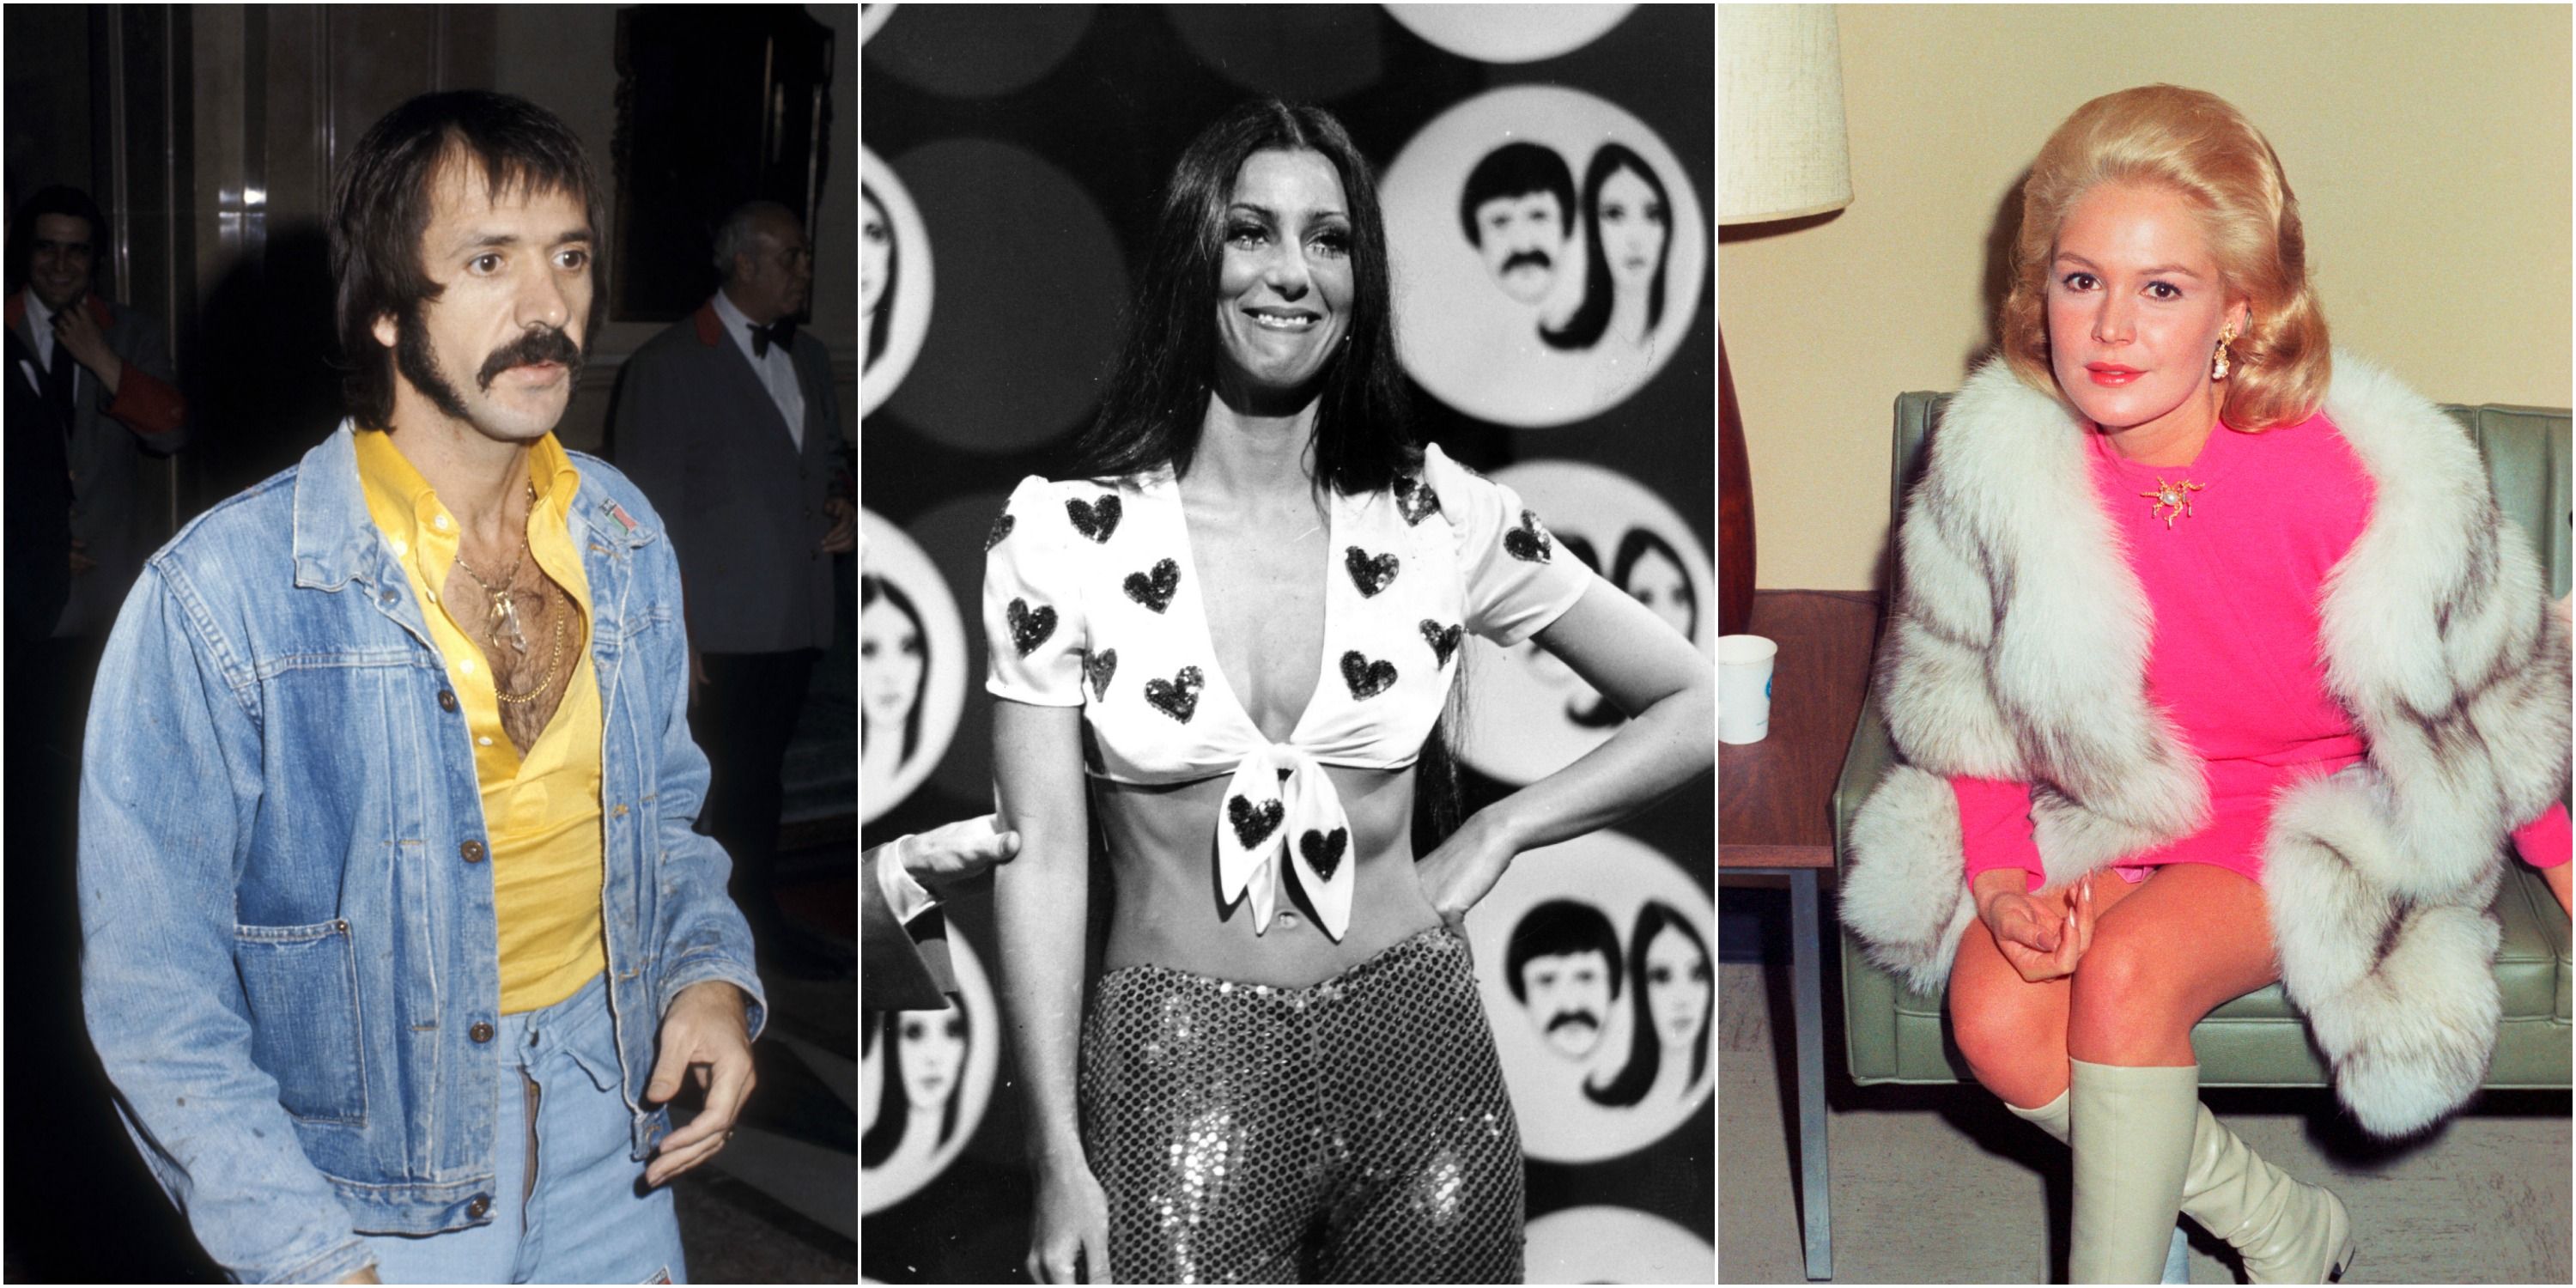 17 Worst 70s Fashion Trends That Everyone Wore - 70s Style Mistakes